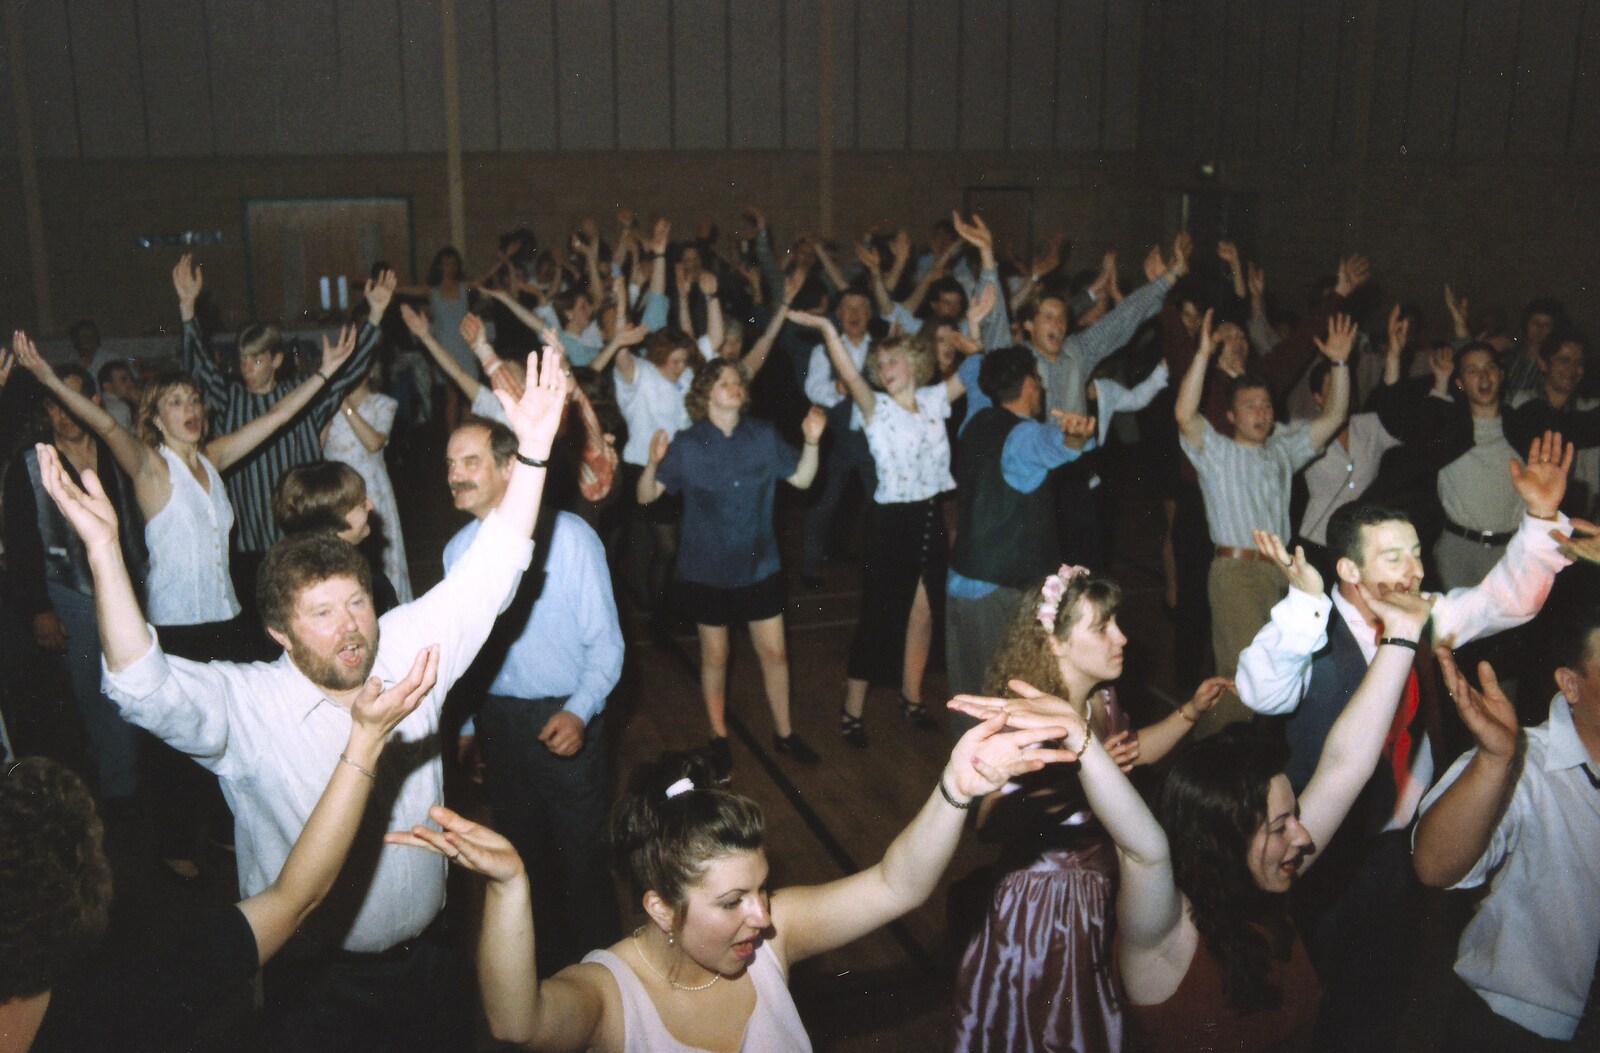 Mass dancing in a sports hall from Debbie's Wedding, Suffolk - 12th June 1999